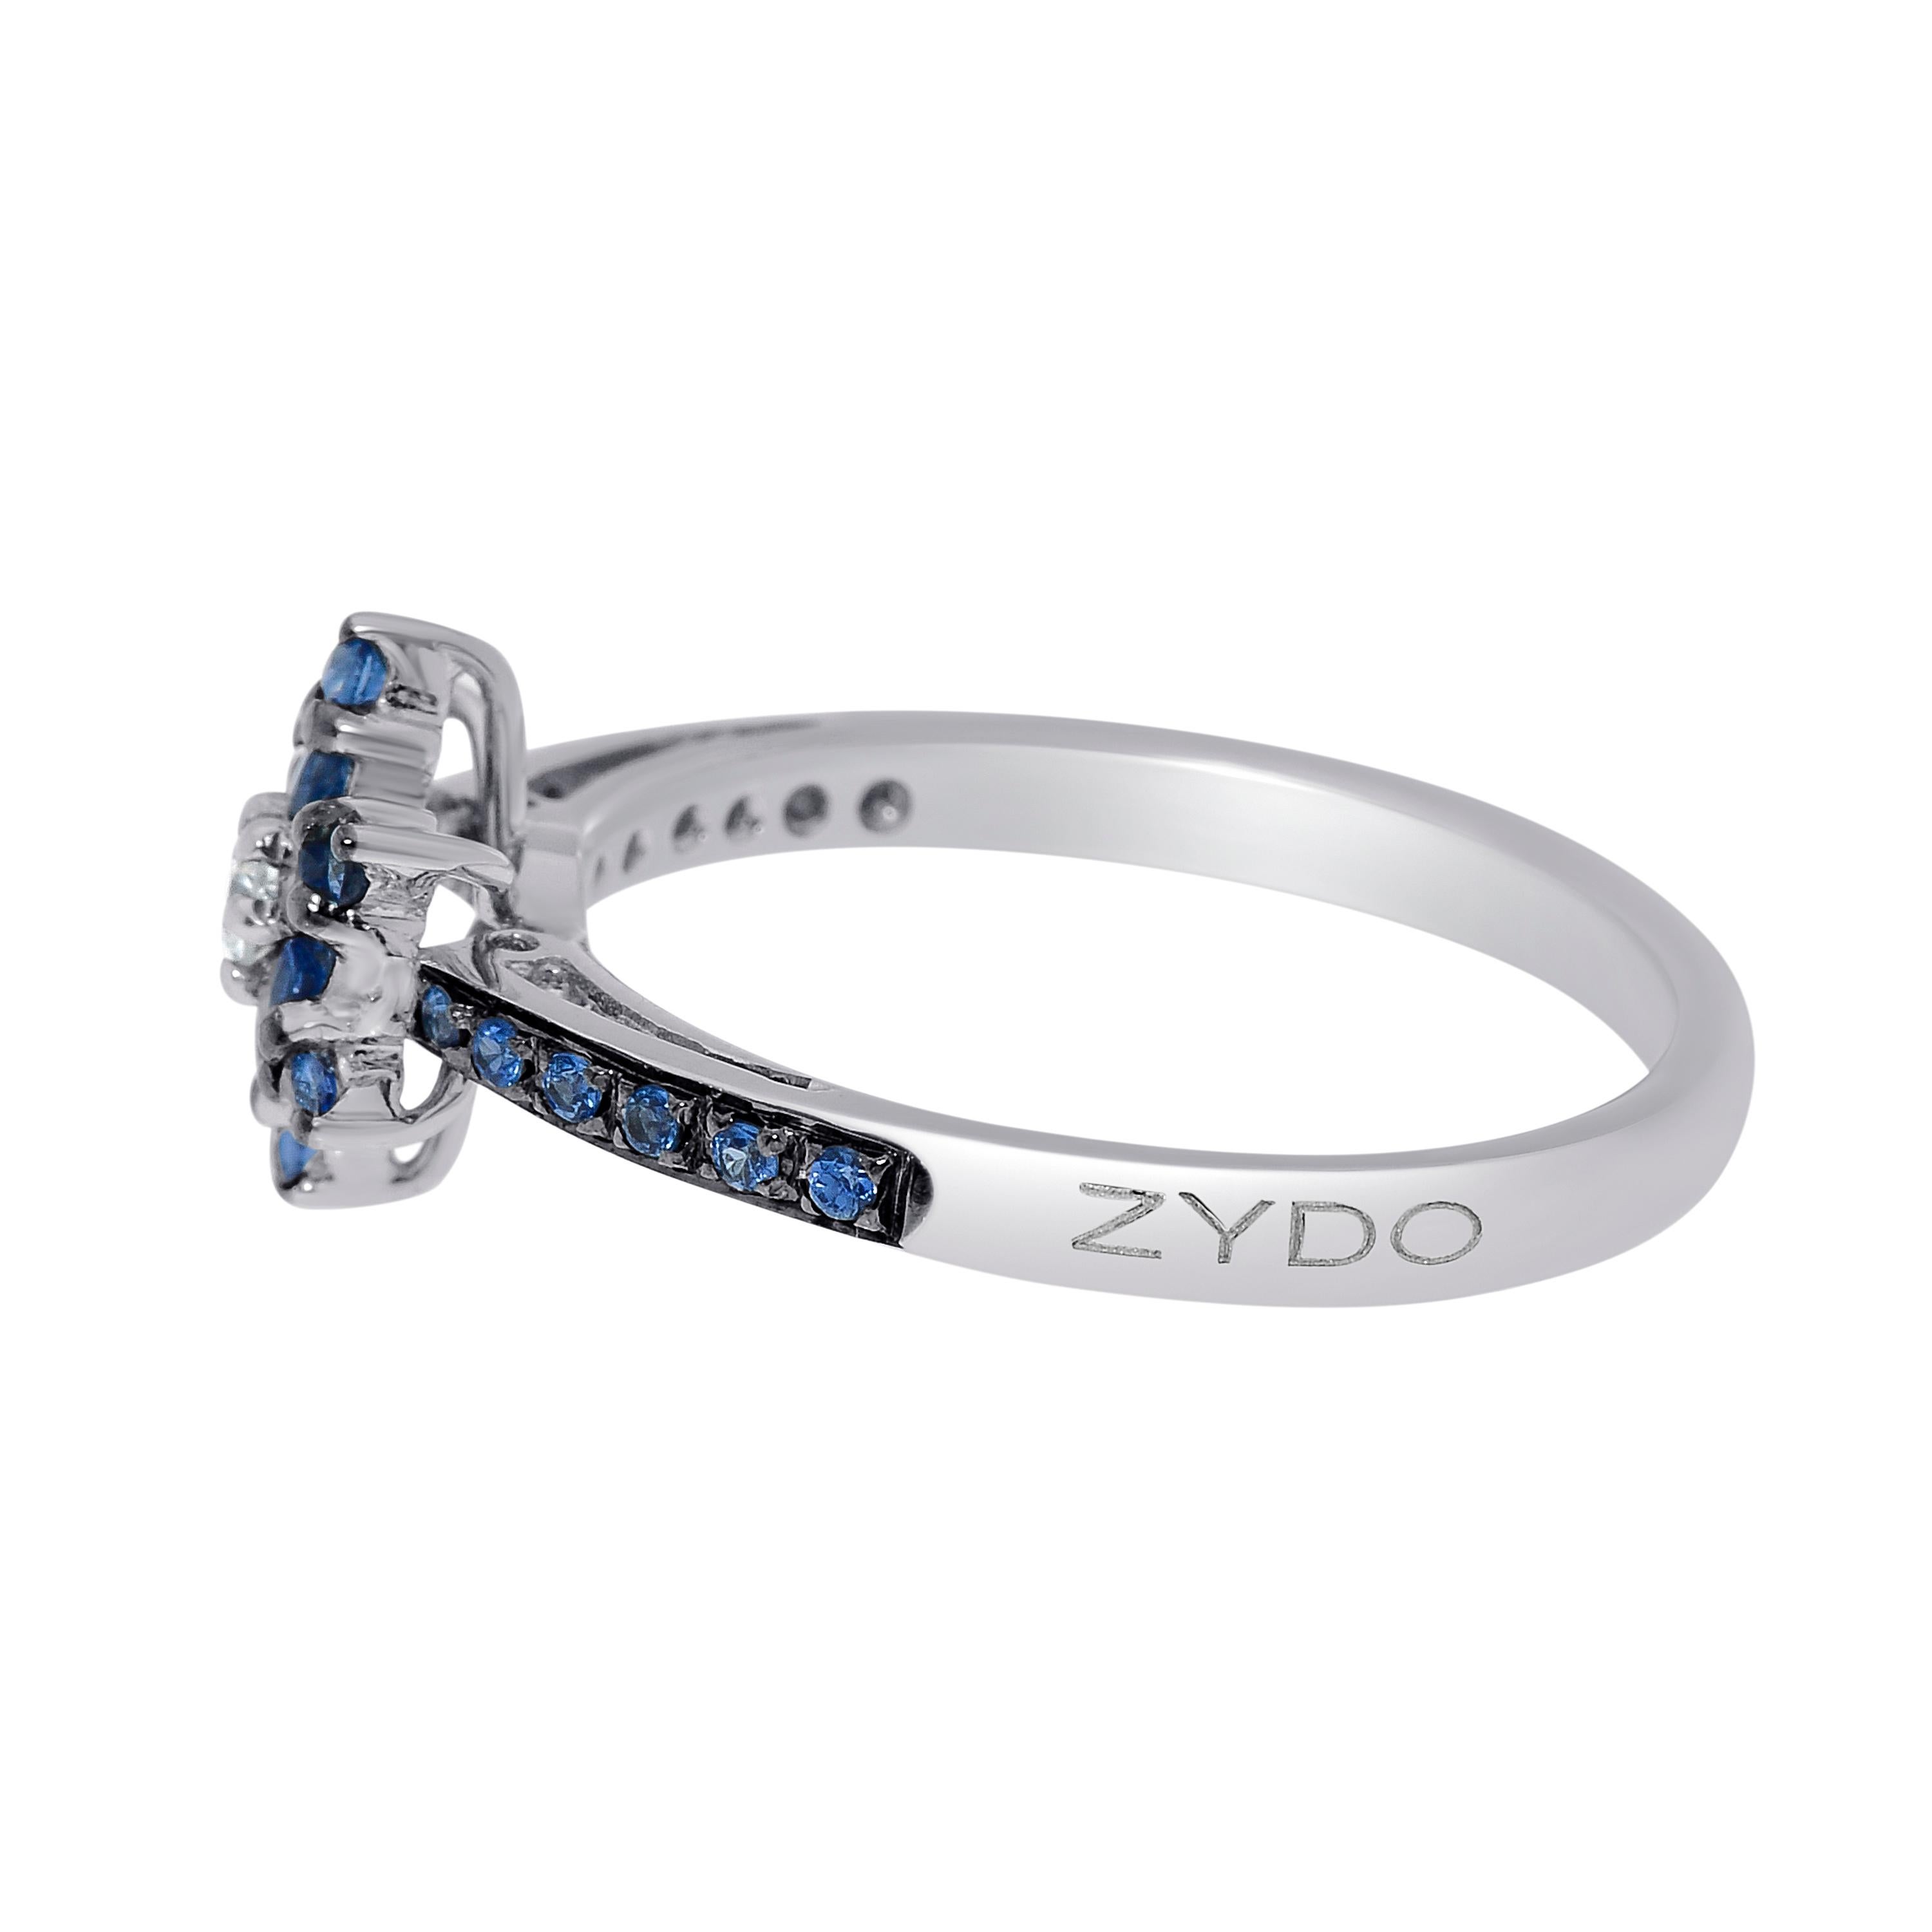 Contemporary Zydo 18K White Gold, Sapphire and Diamond Band Ring sz. 7 For Sale